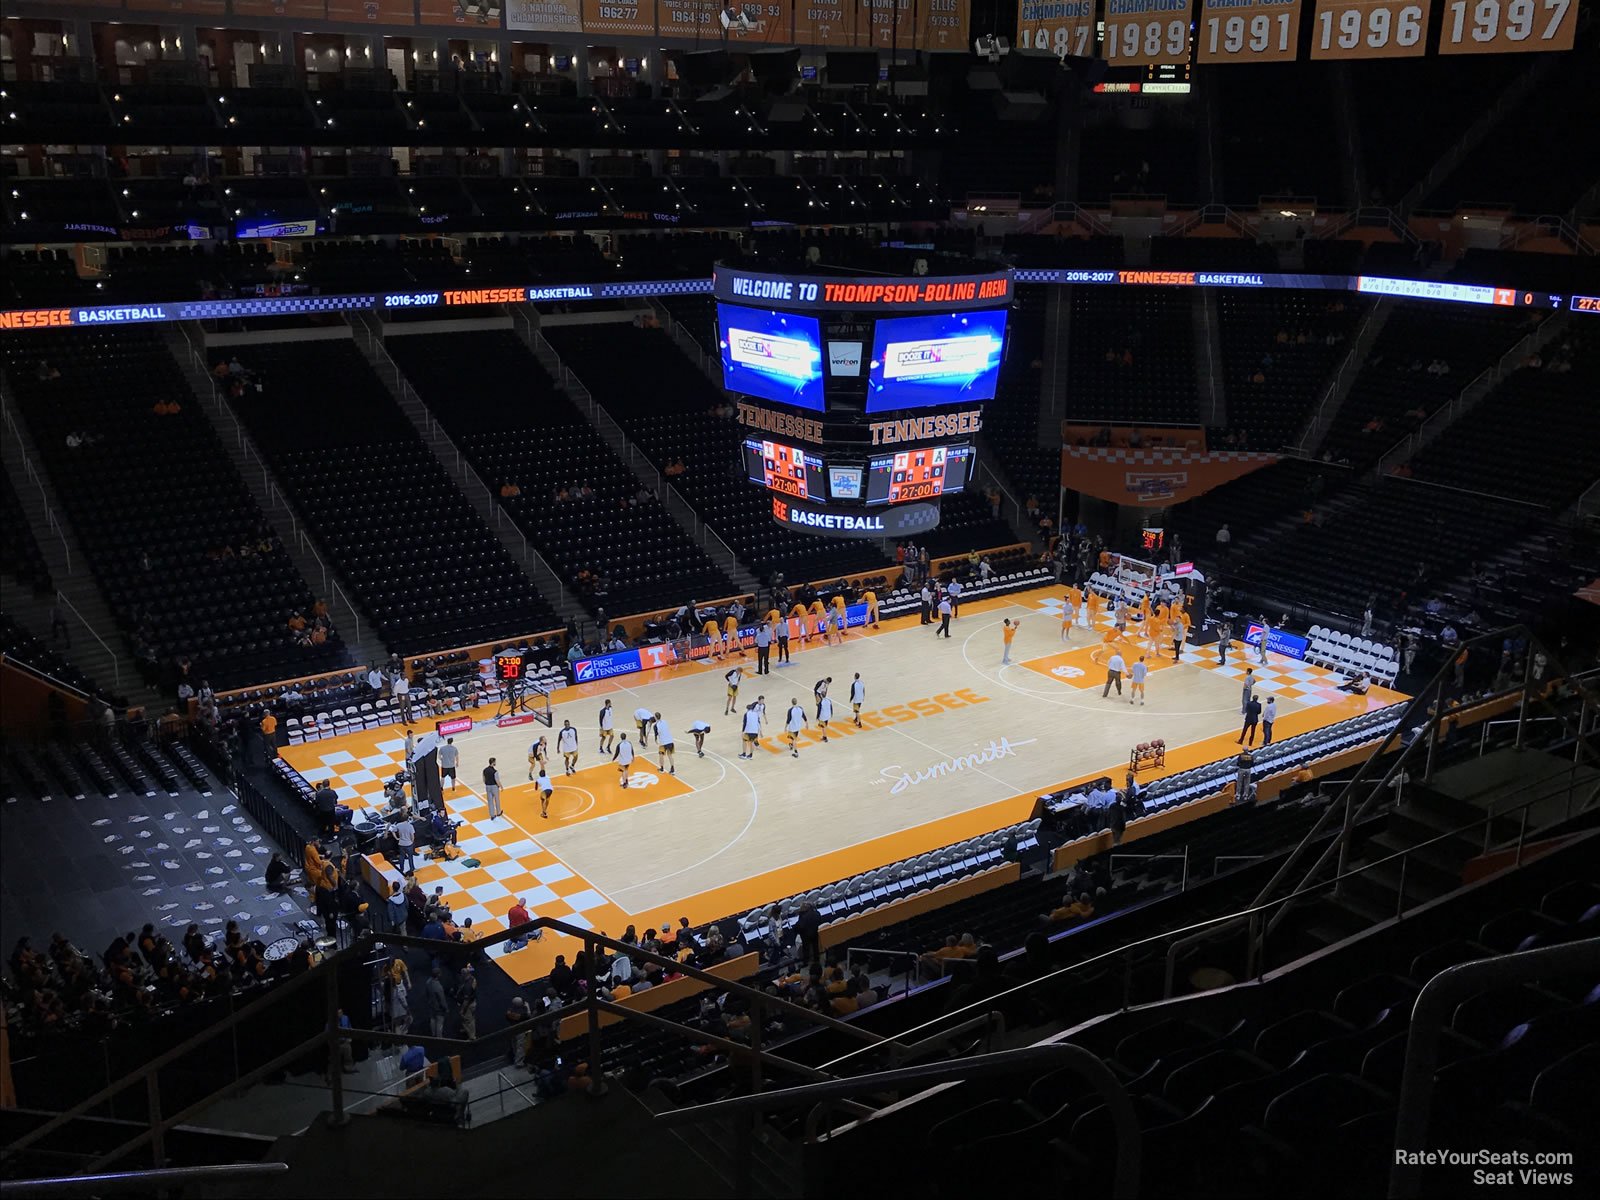 section 325a, row 7 seat view  - thompson-boling arena